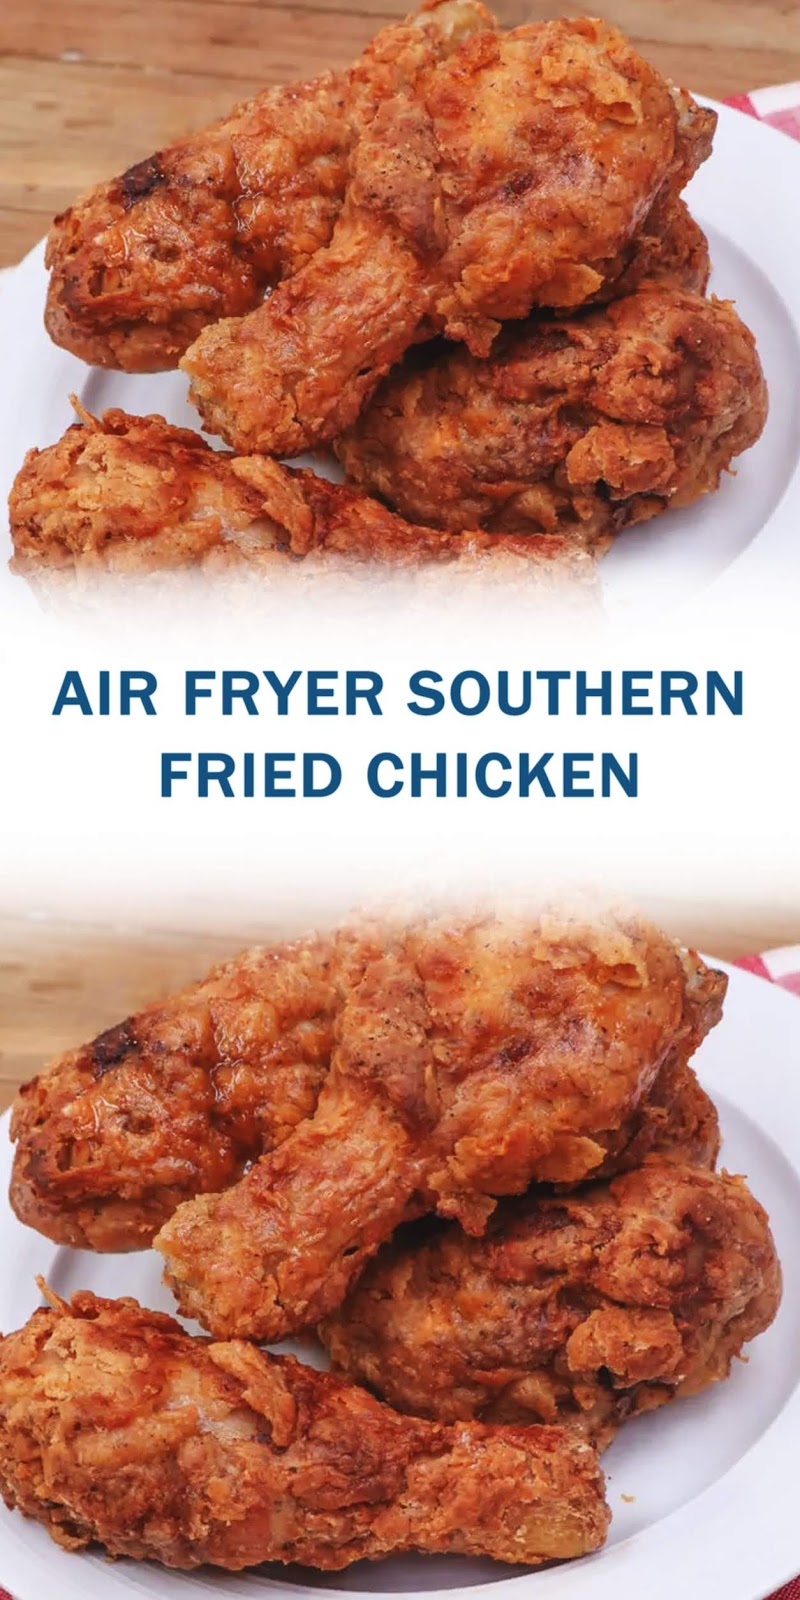 AIR FRYER SOUTHERN FRIED CHICKEN